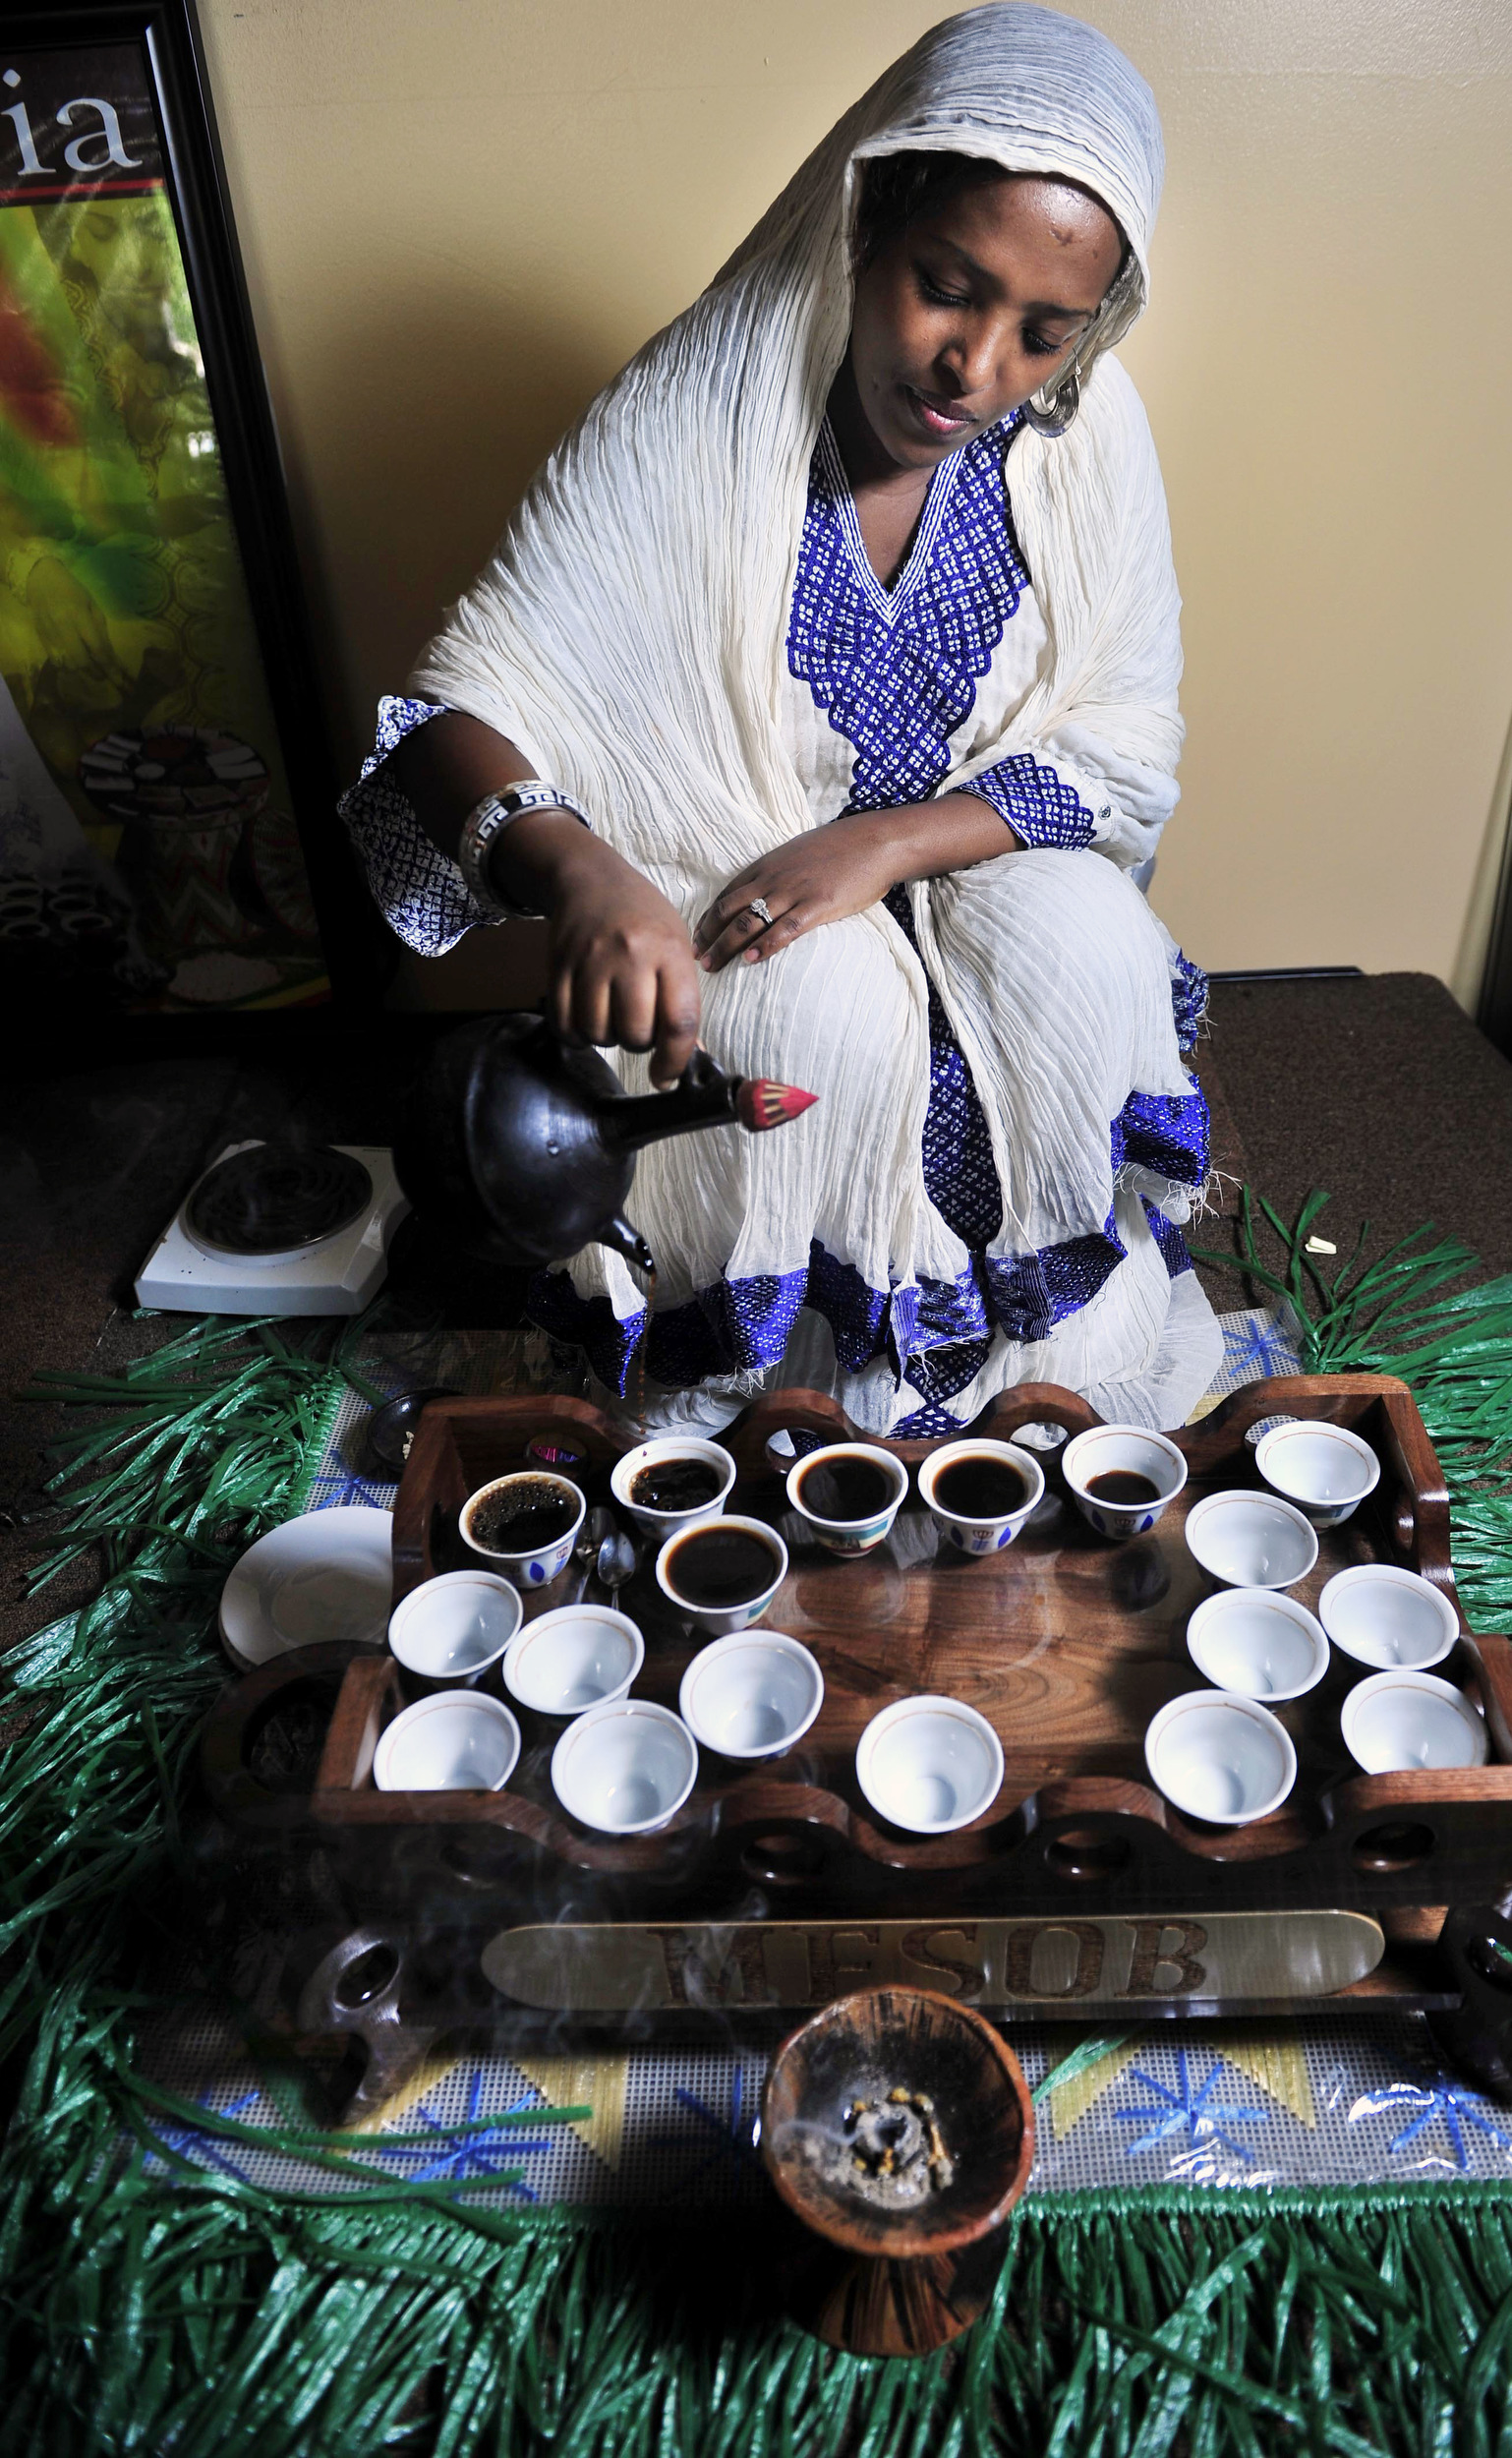  Hiwot Shafi pours out ethiopian coffee in a traditional coffee ceremony at Mesob Ethiopian Restaurant in Nashville, Tenn. 